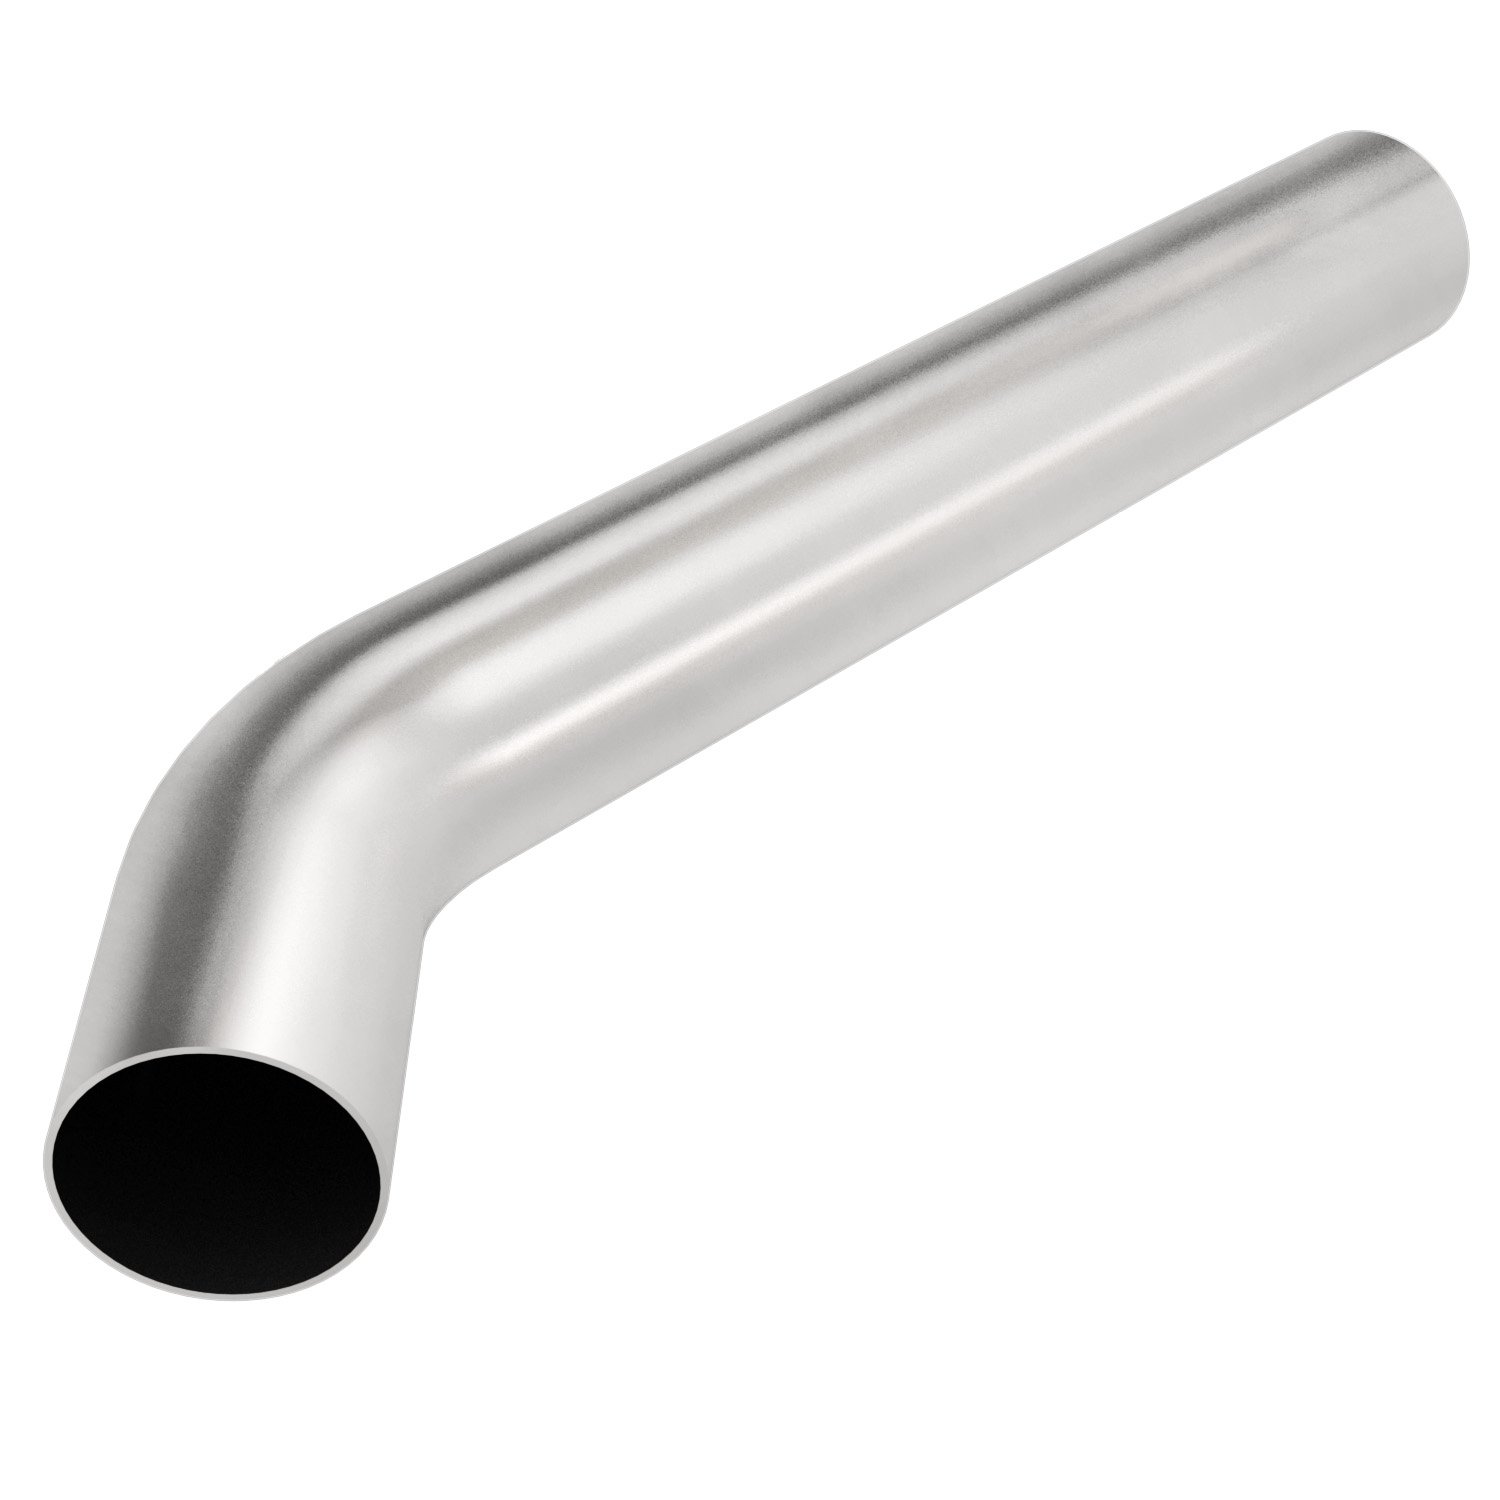 Stainless Steel 45° Transition Exhaust Pipe Outside Diameter: 3"